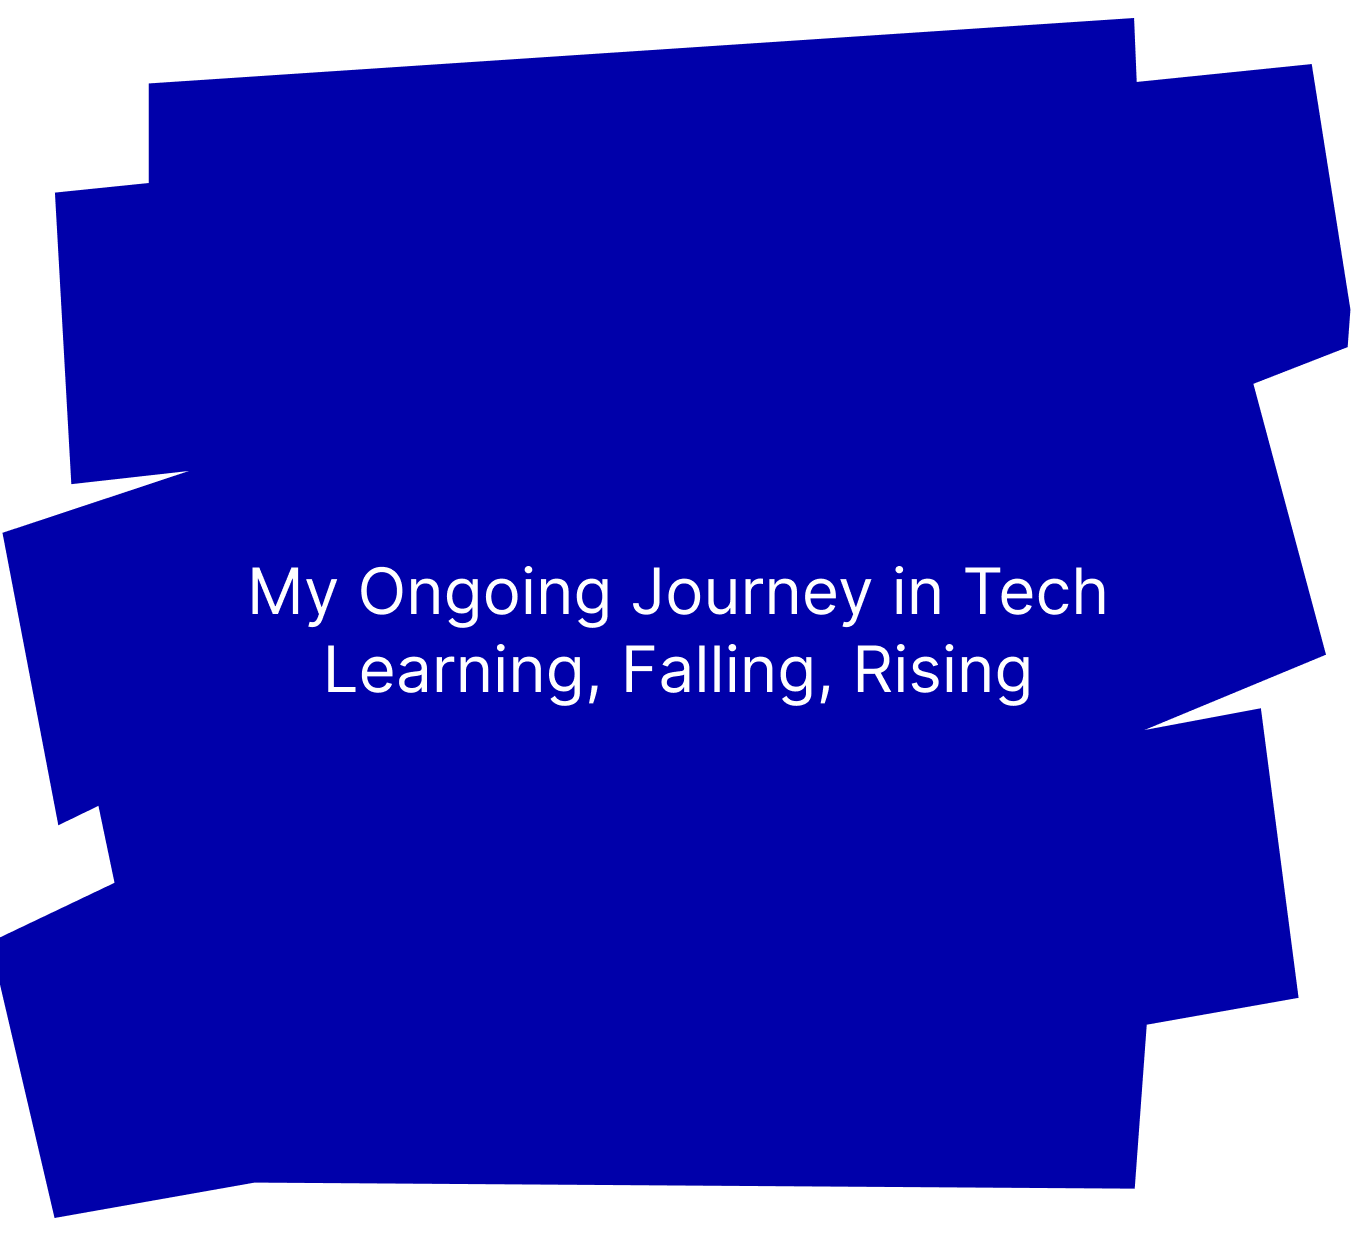 My Ongoing Journey in Tech - Learning, Falling, Rising